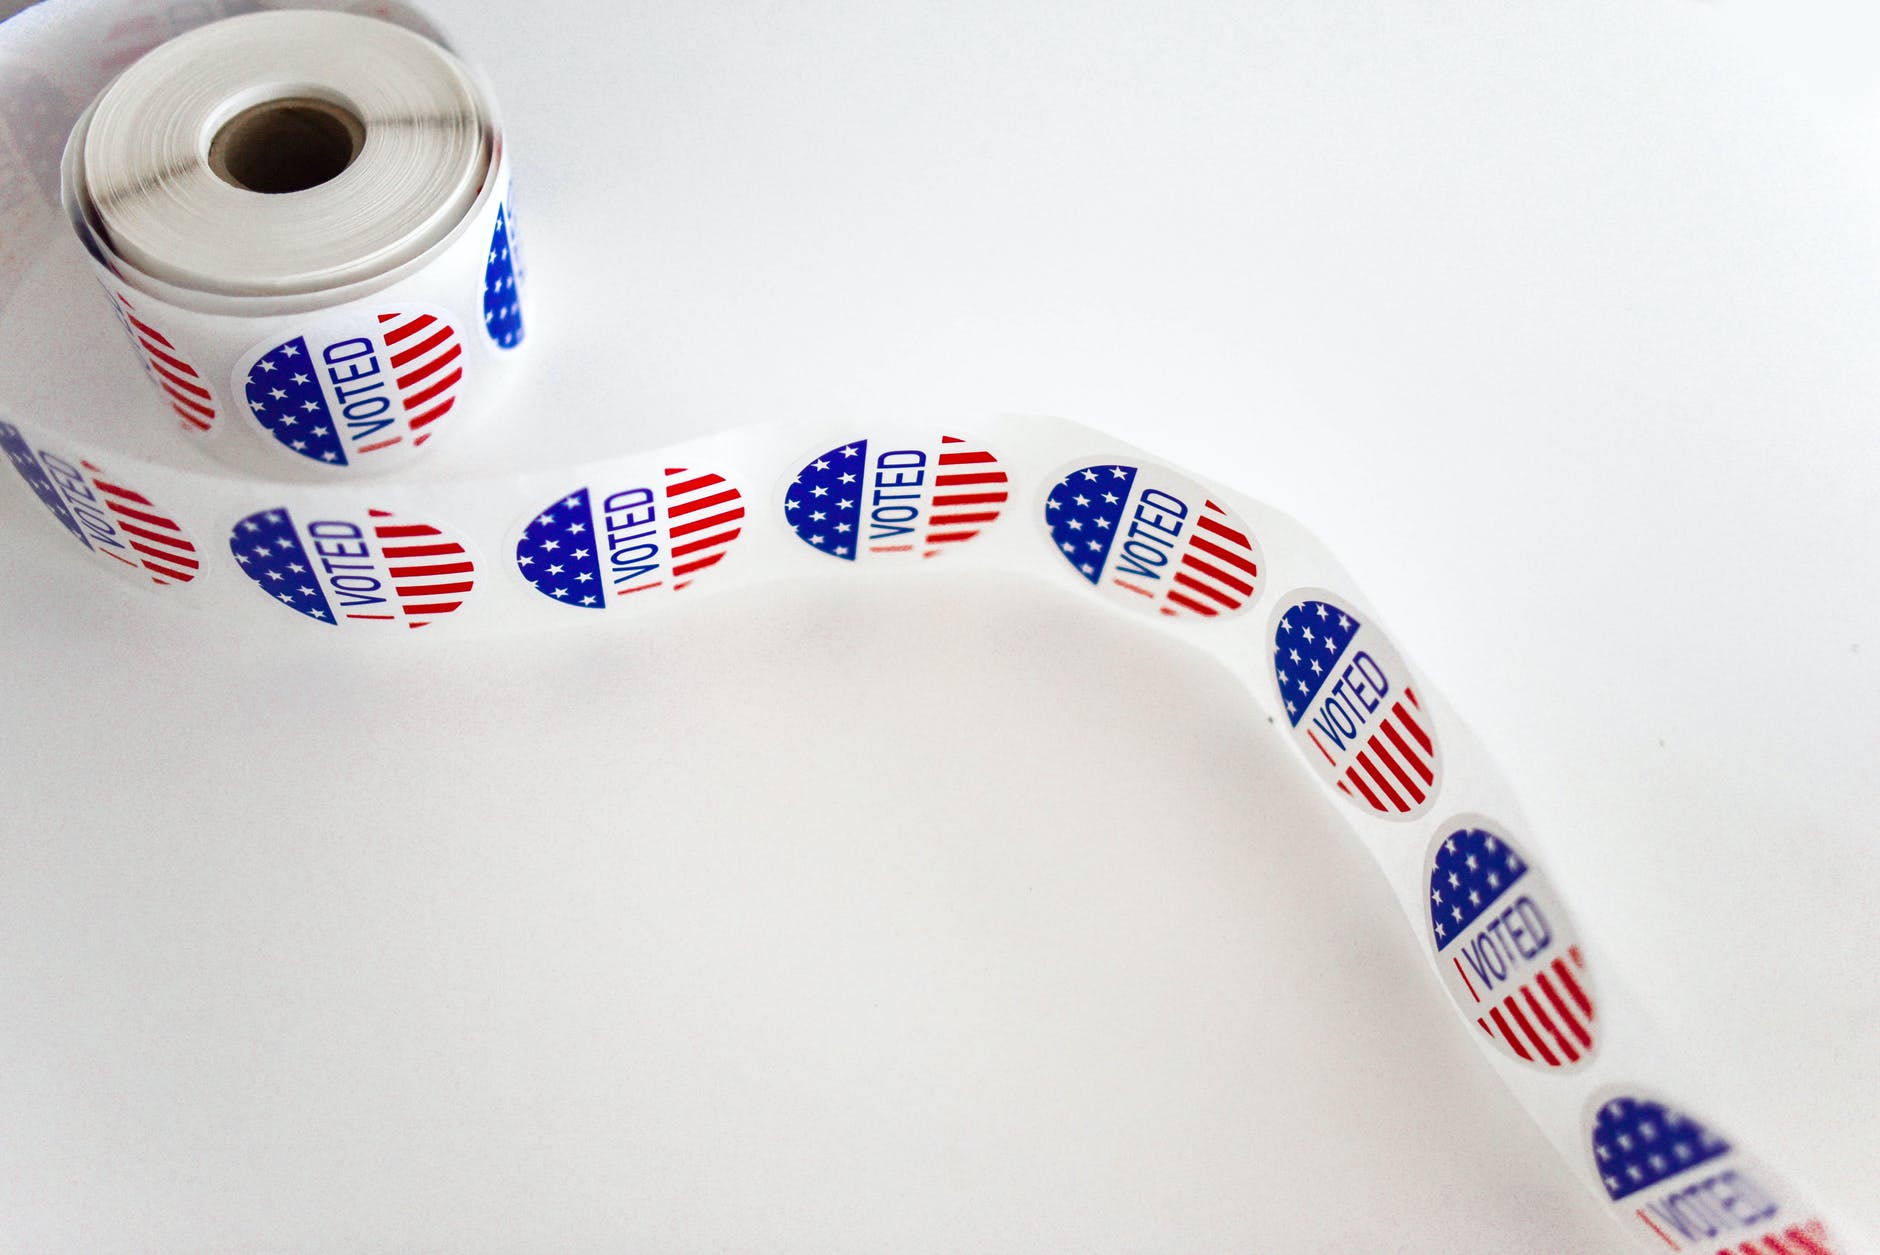 i voted sticker spool on white surface